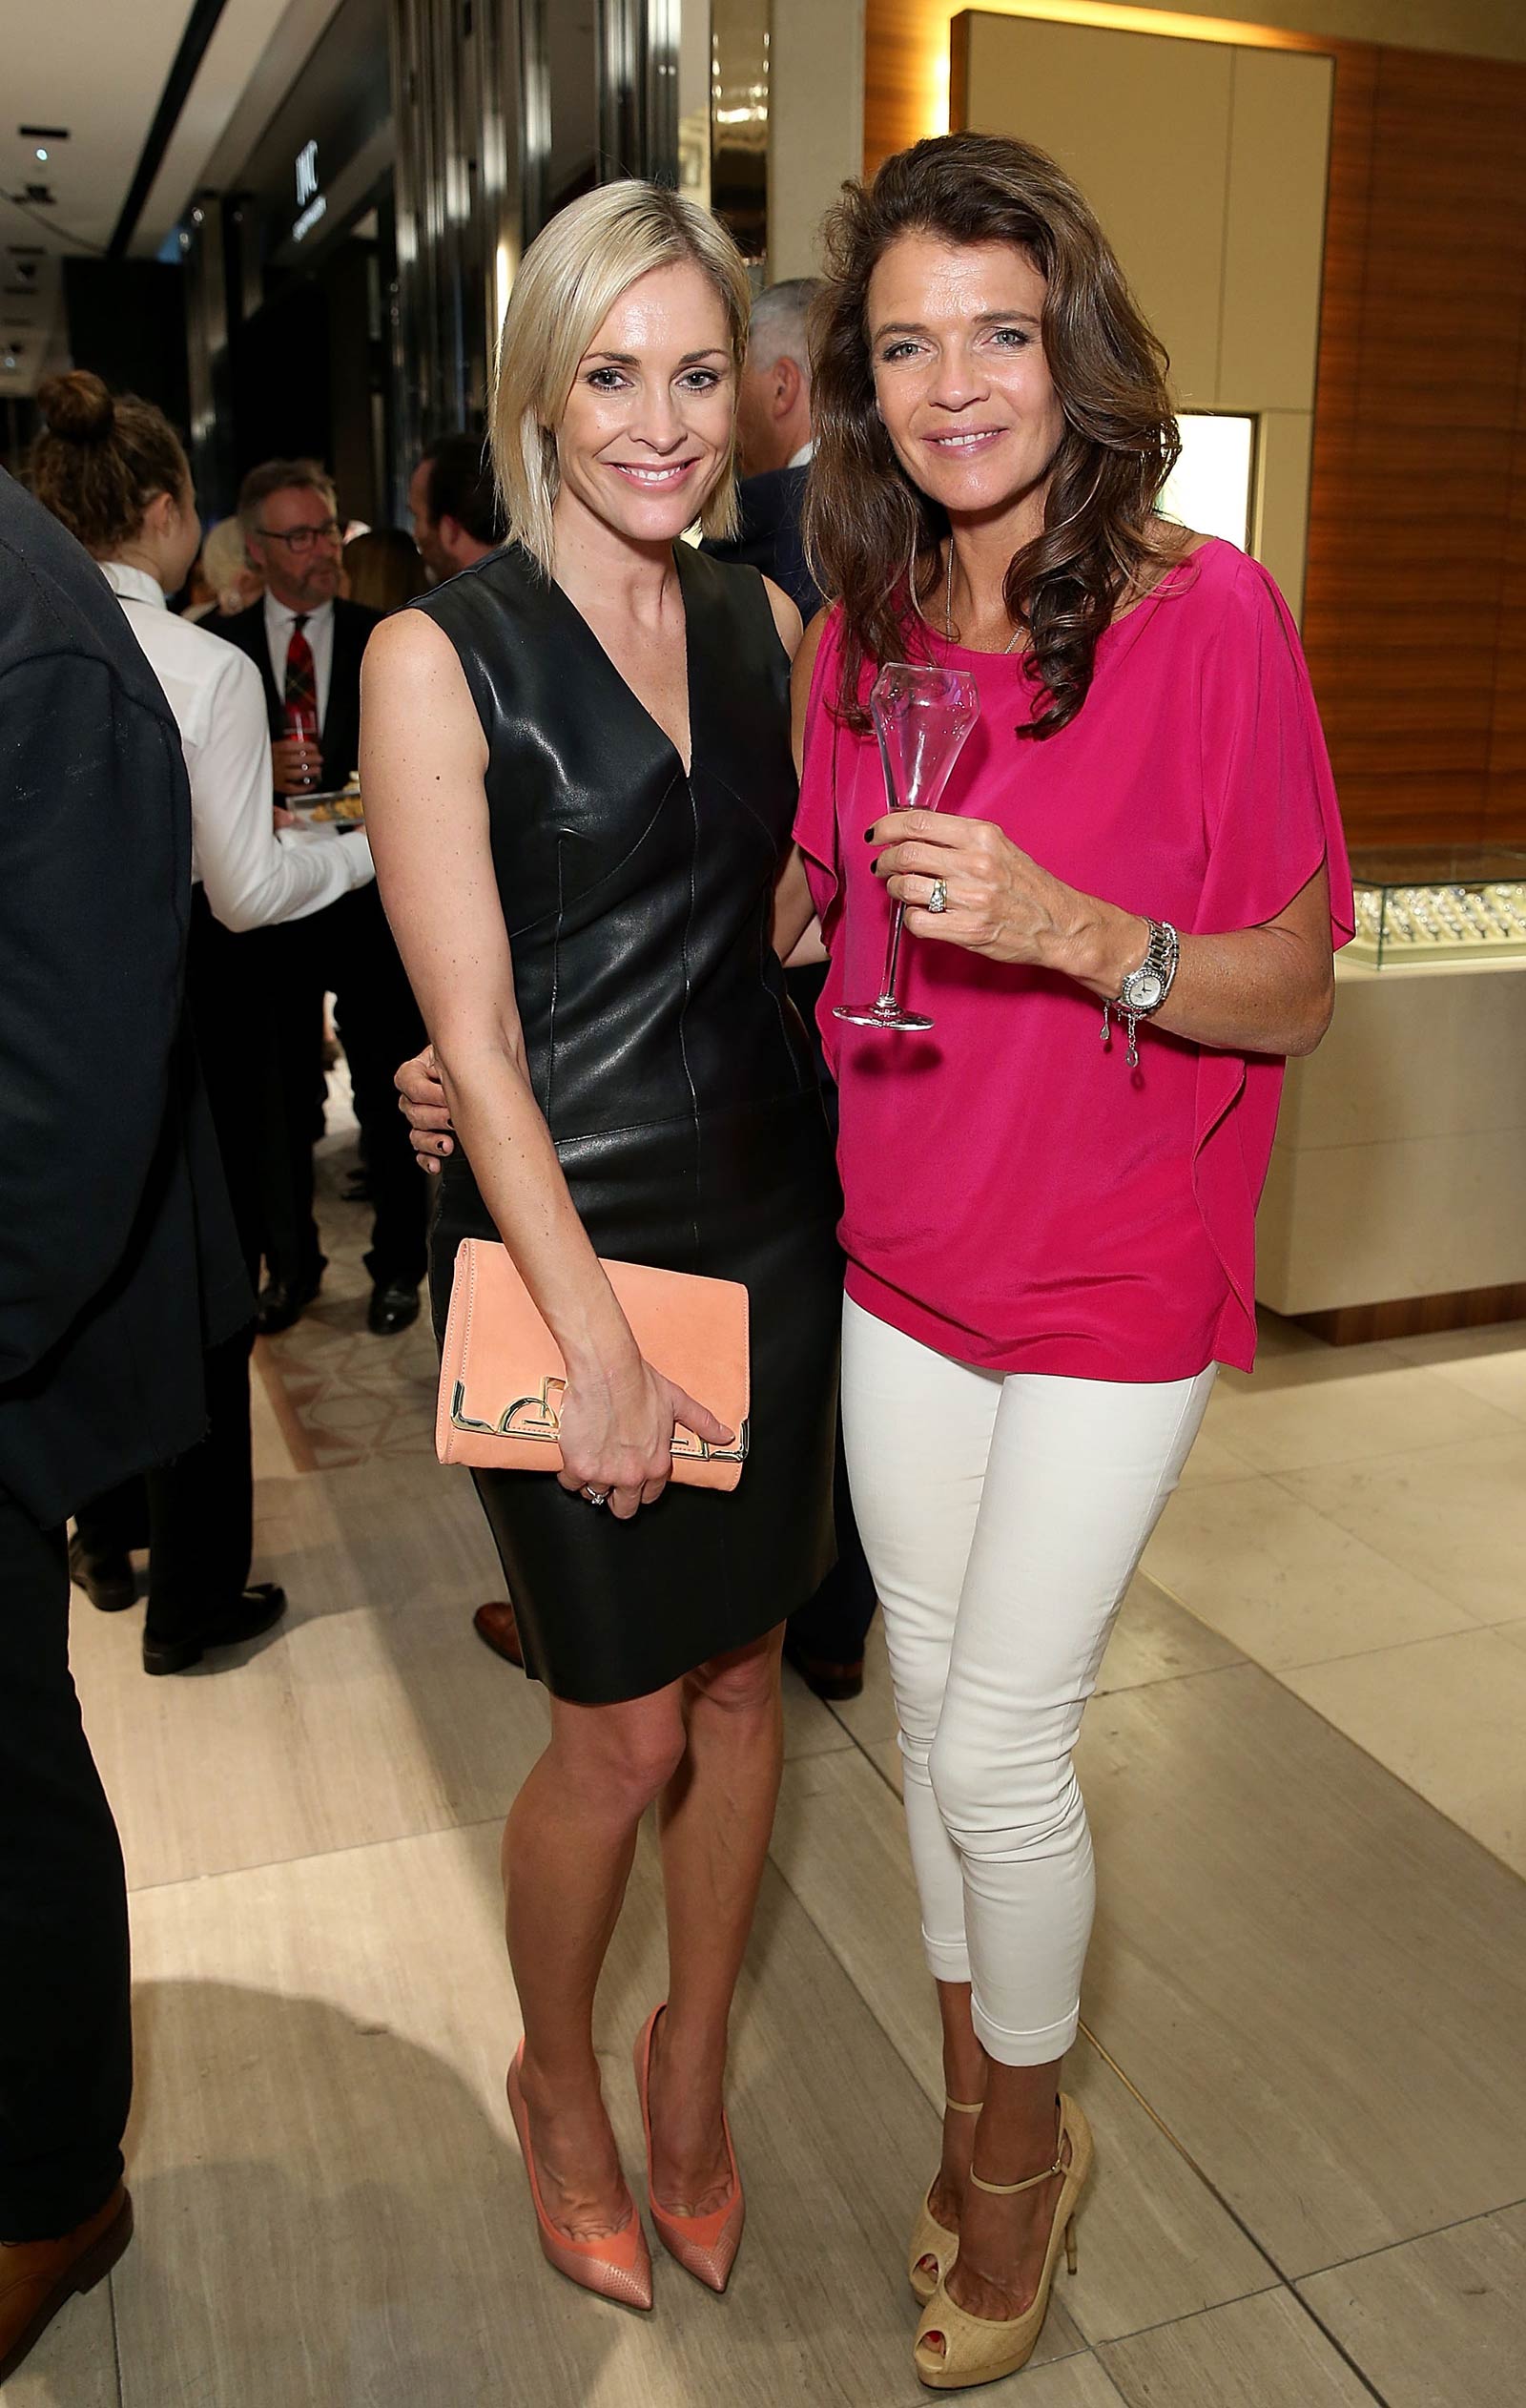 Jenni Falconer attends Hospice Charity Event